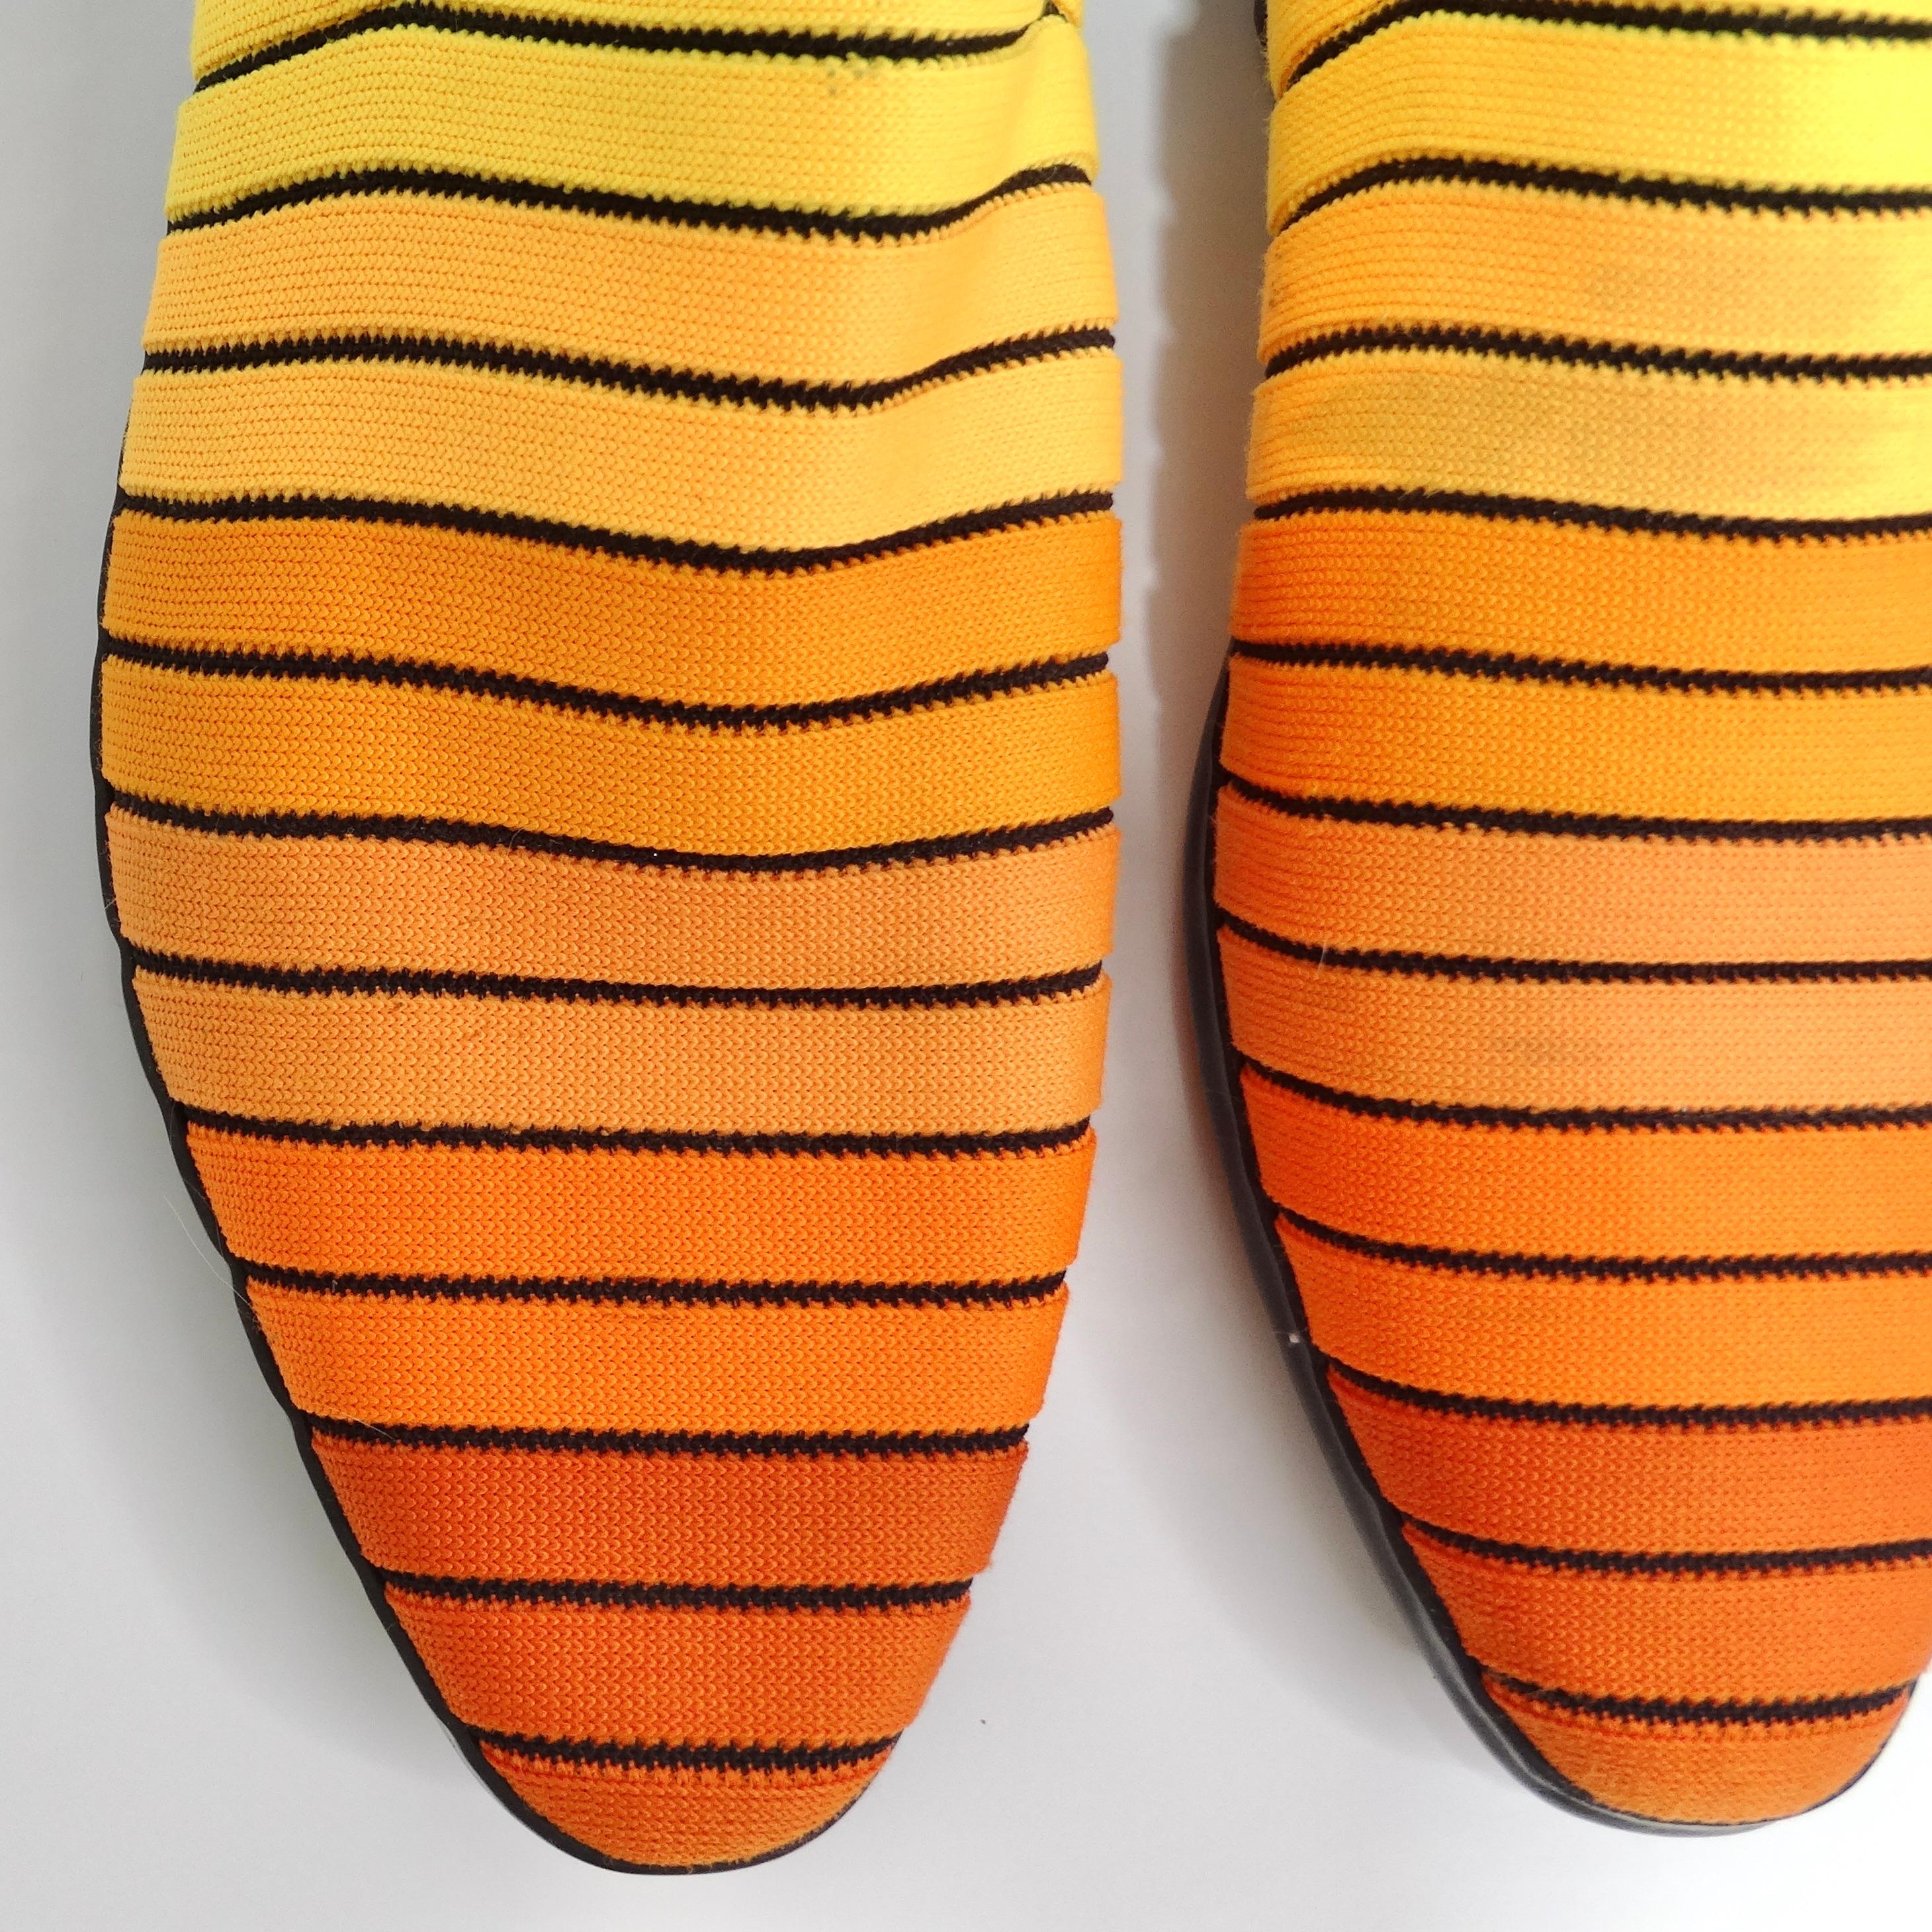 Introducing the Issey Miyake Orange Gradient Flats from the iconic Pleats Please collection. These stunning slip-on flats from the early 2000s feature a unique knitted gradient design that transitions from a deep yellow to a vibrant orange, ending